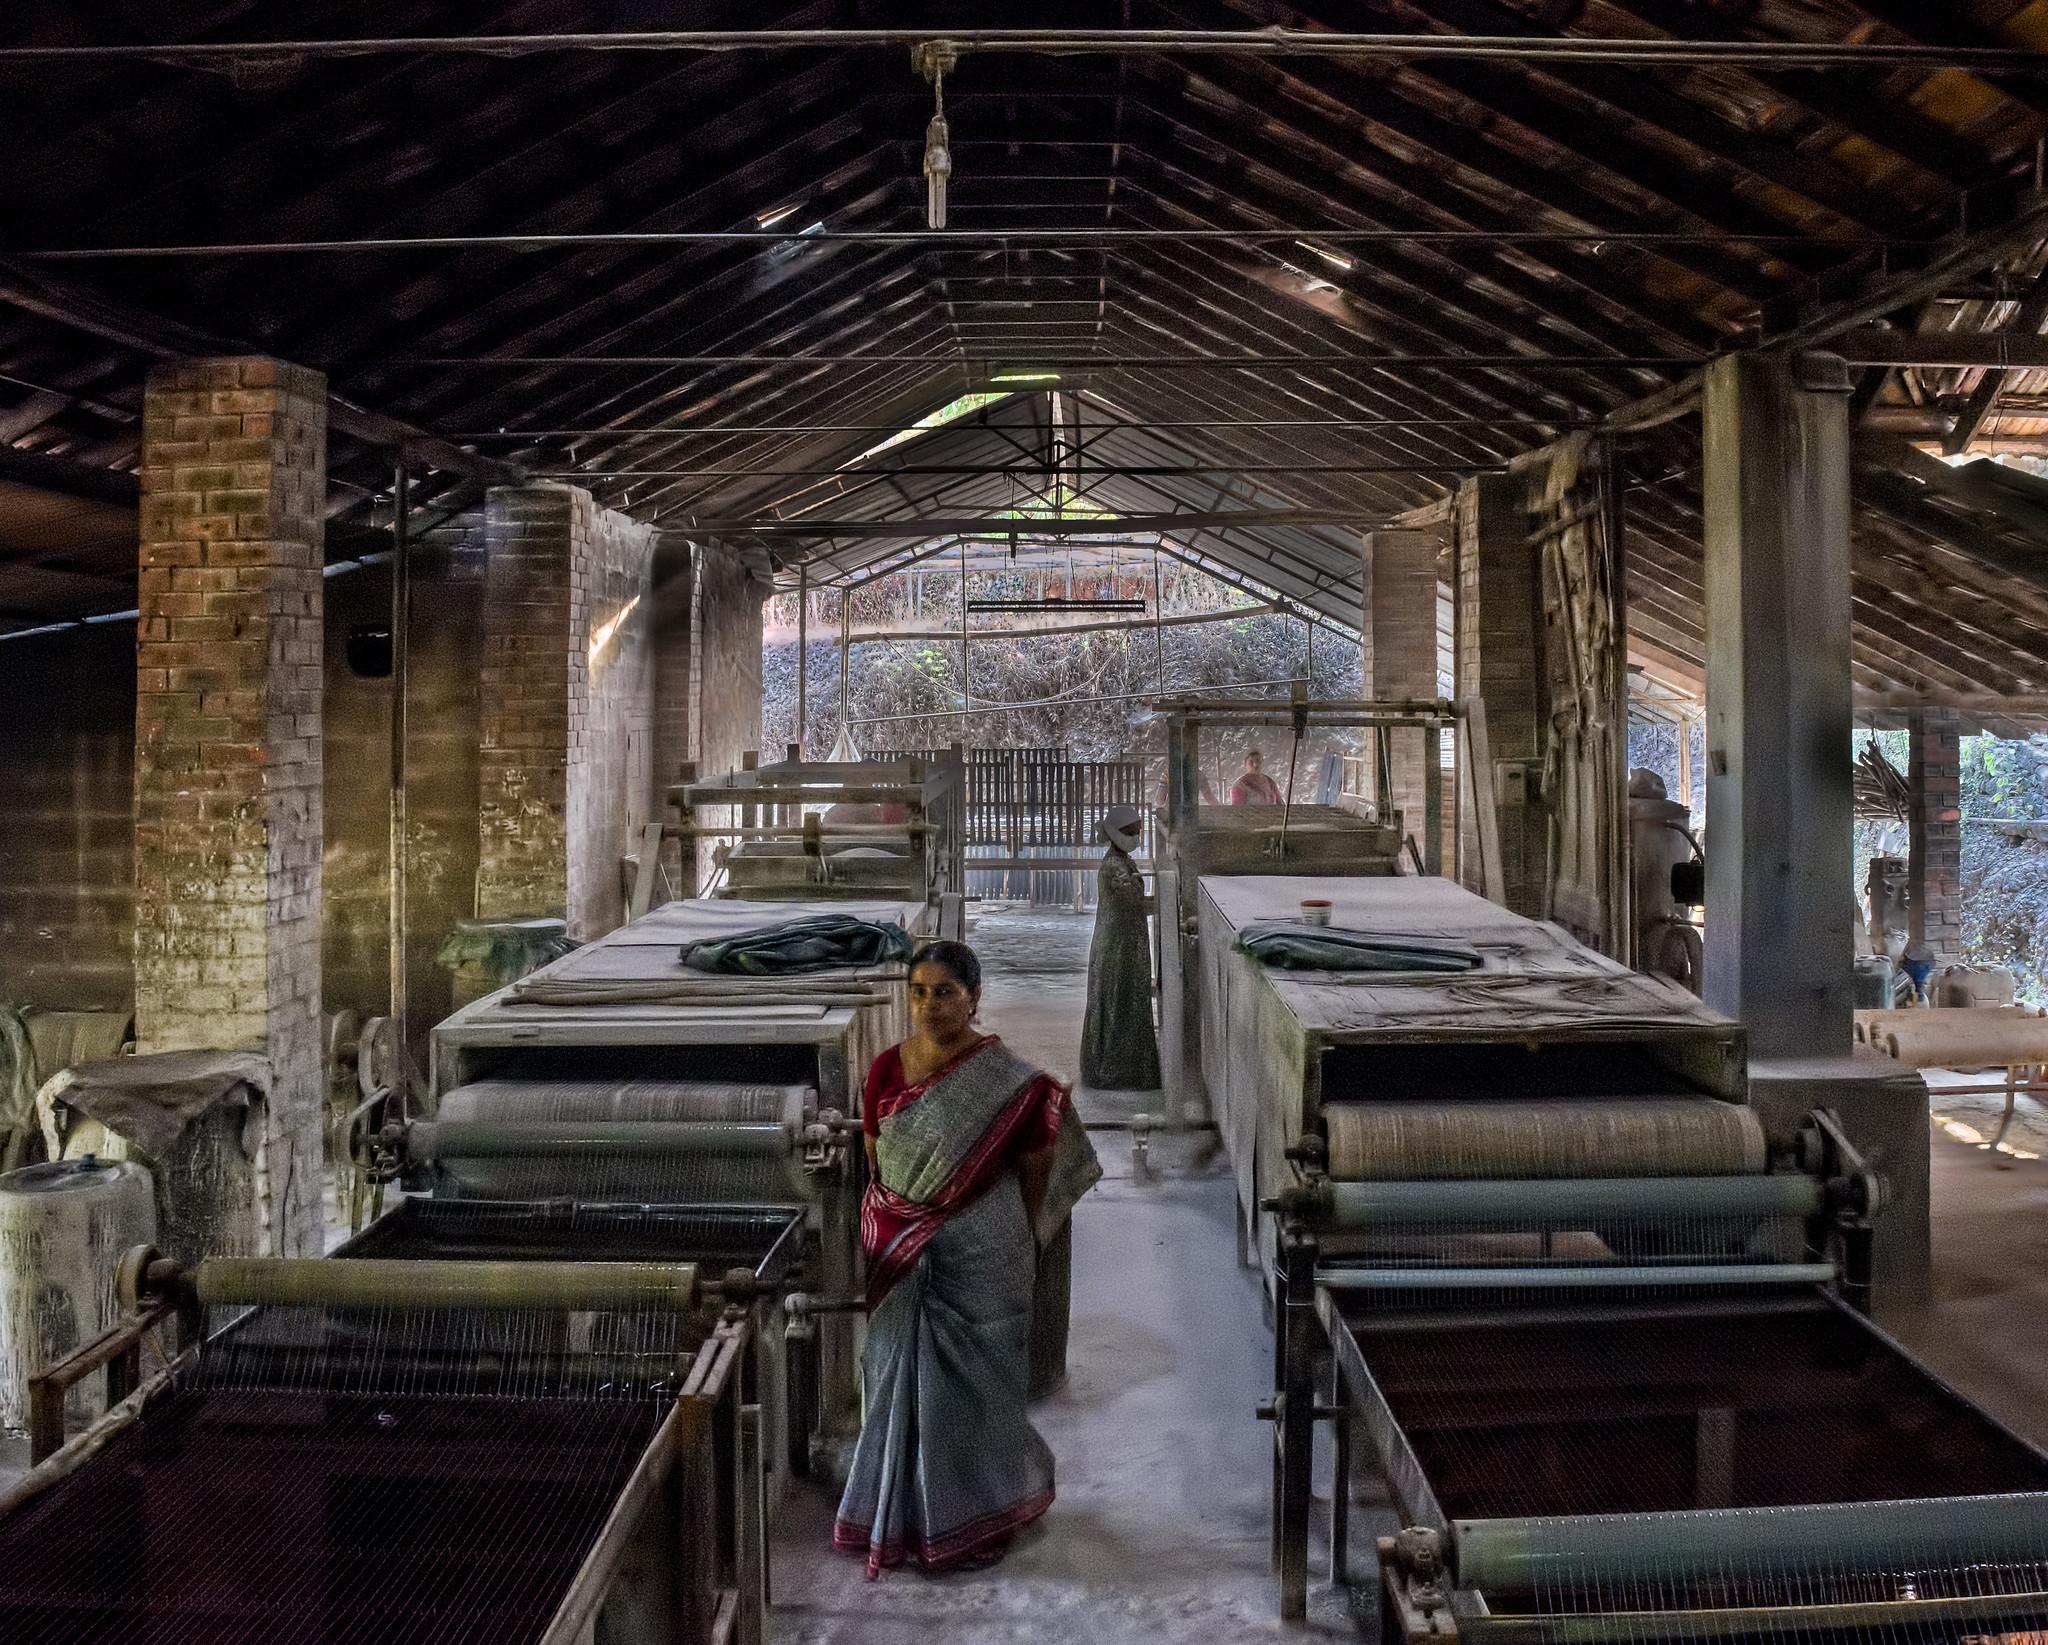 A woman in a sari in a rubber factory in India